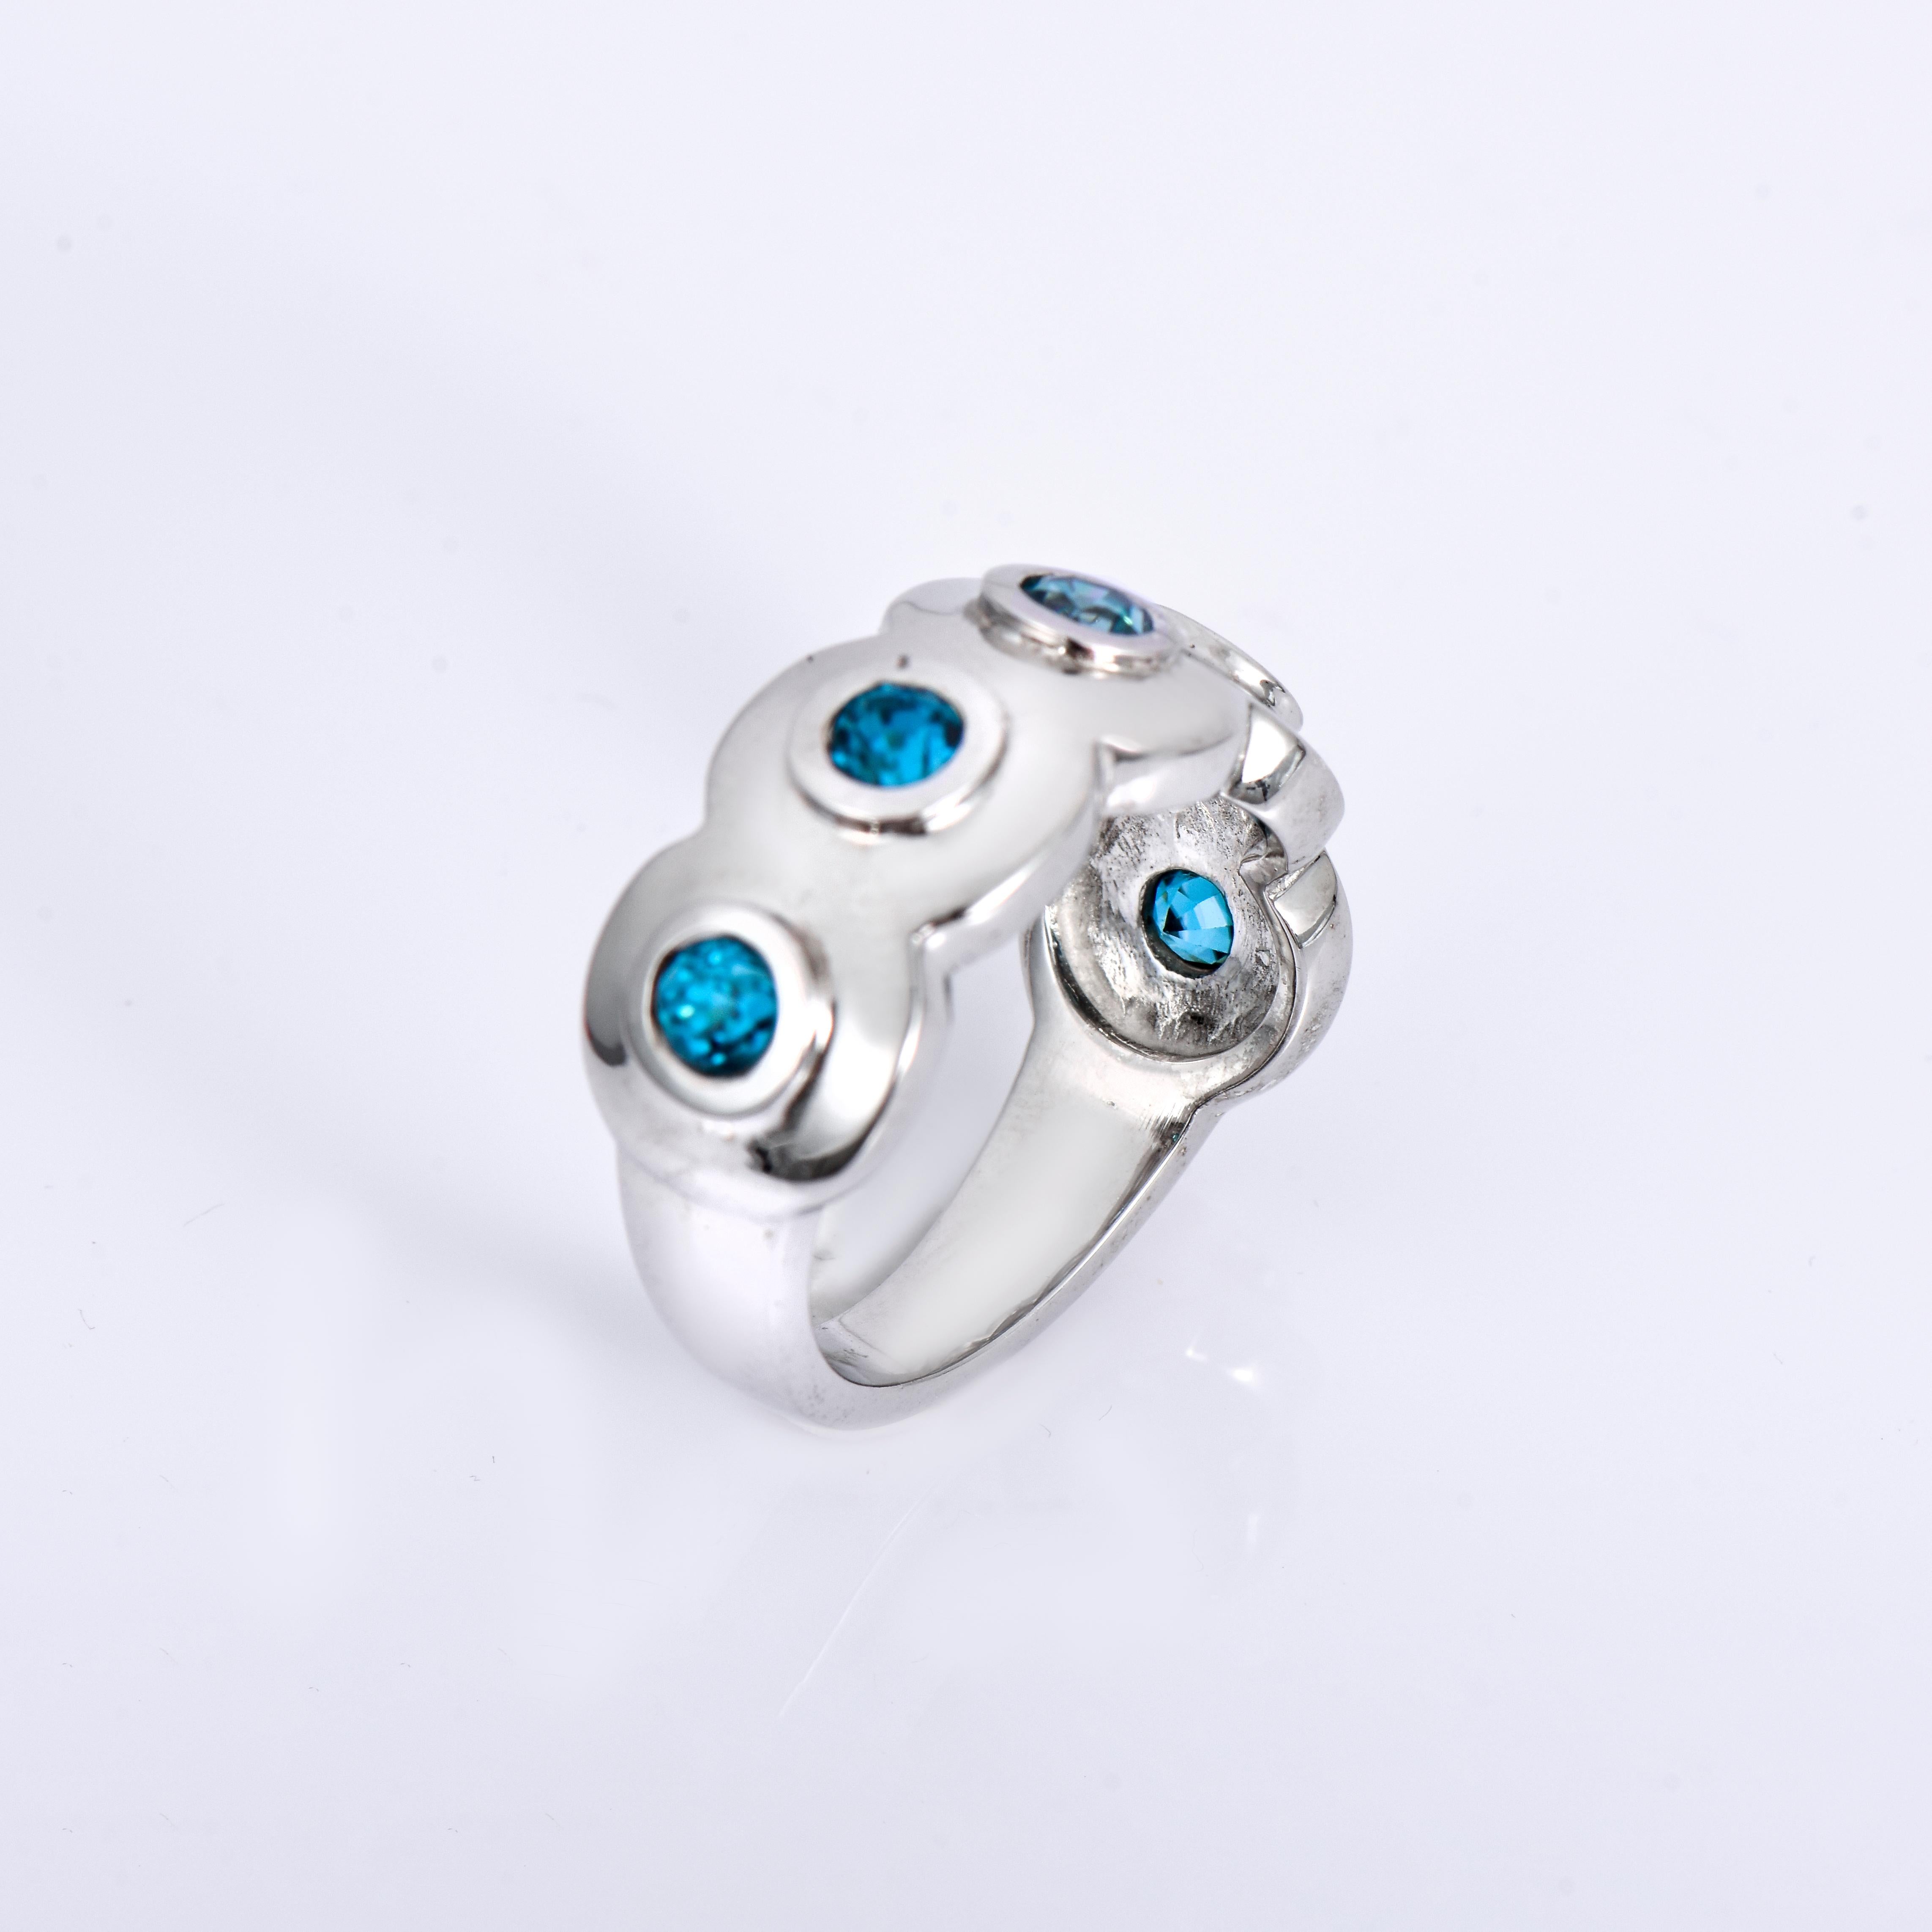 Orloff of Denmark; 925 Sterling Silver Ring set with 5 Natural Cambodian Blue Zircons totaling to 2.80 carats.

This handcrafted 925 sterling silver ring presents a lovely array of natural Cambodian blue zircons. The blue zircons, with their